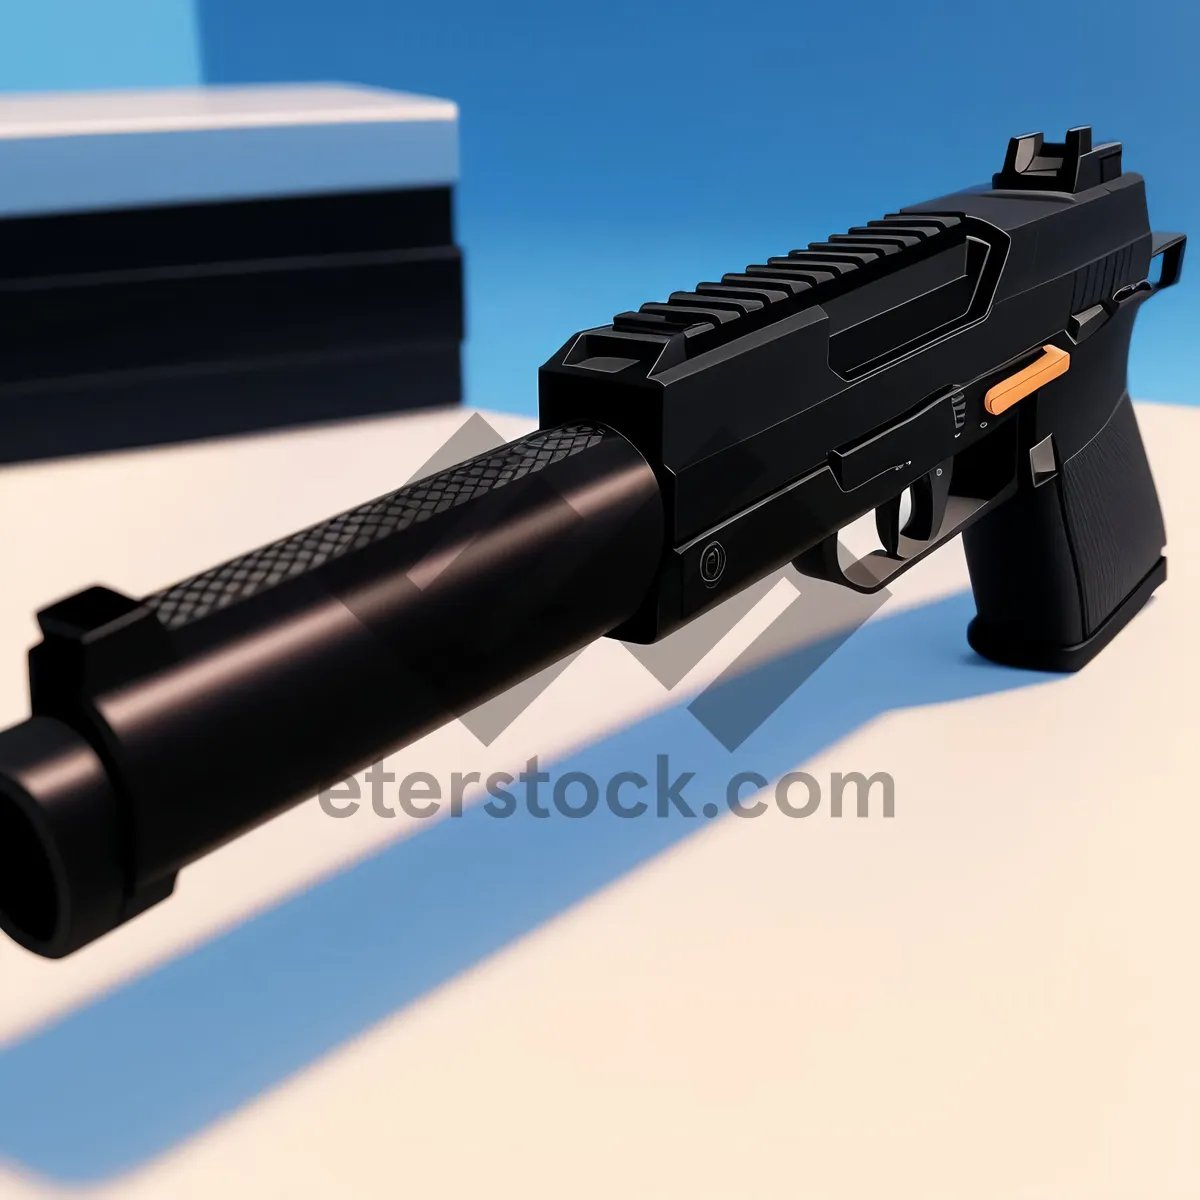 Picture of Advanced Gas Gun with High-Tech Camera Technology